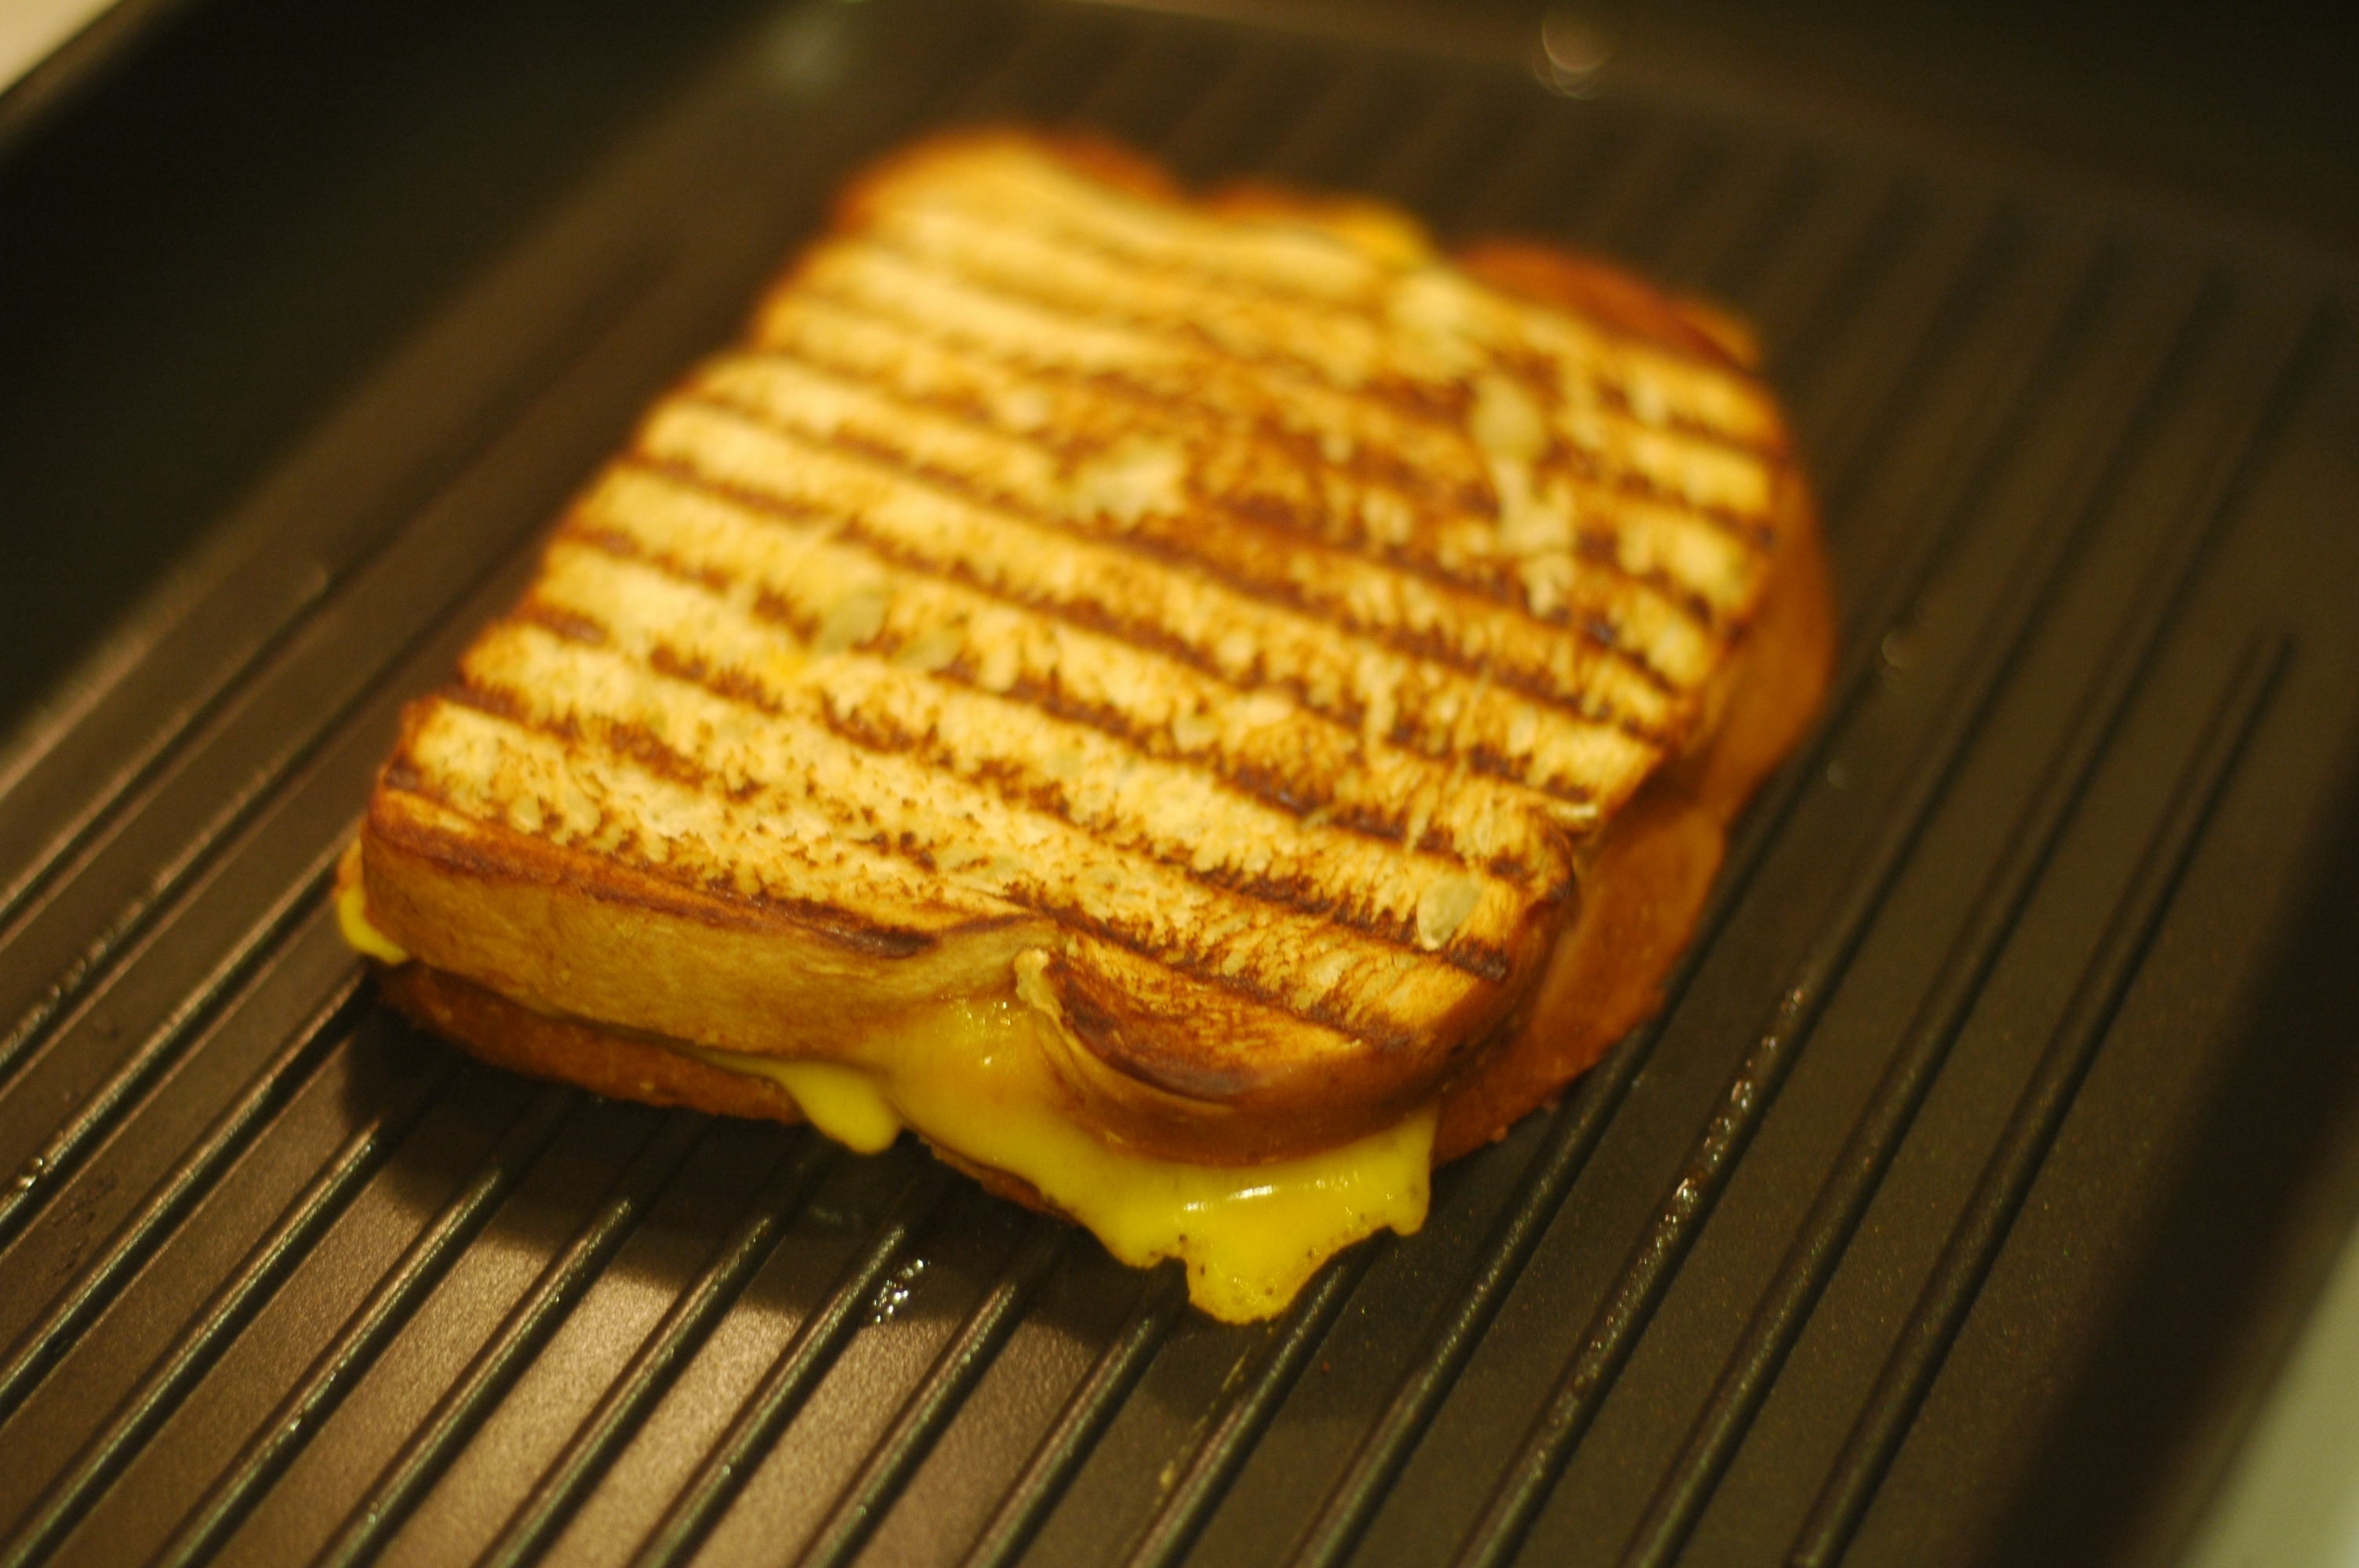 Grilled Cheese.